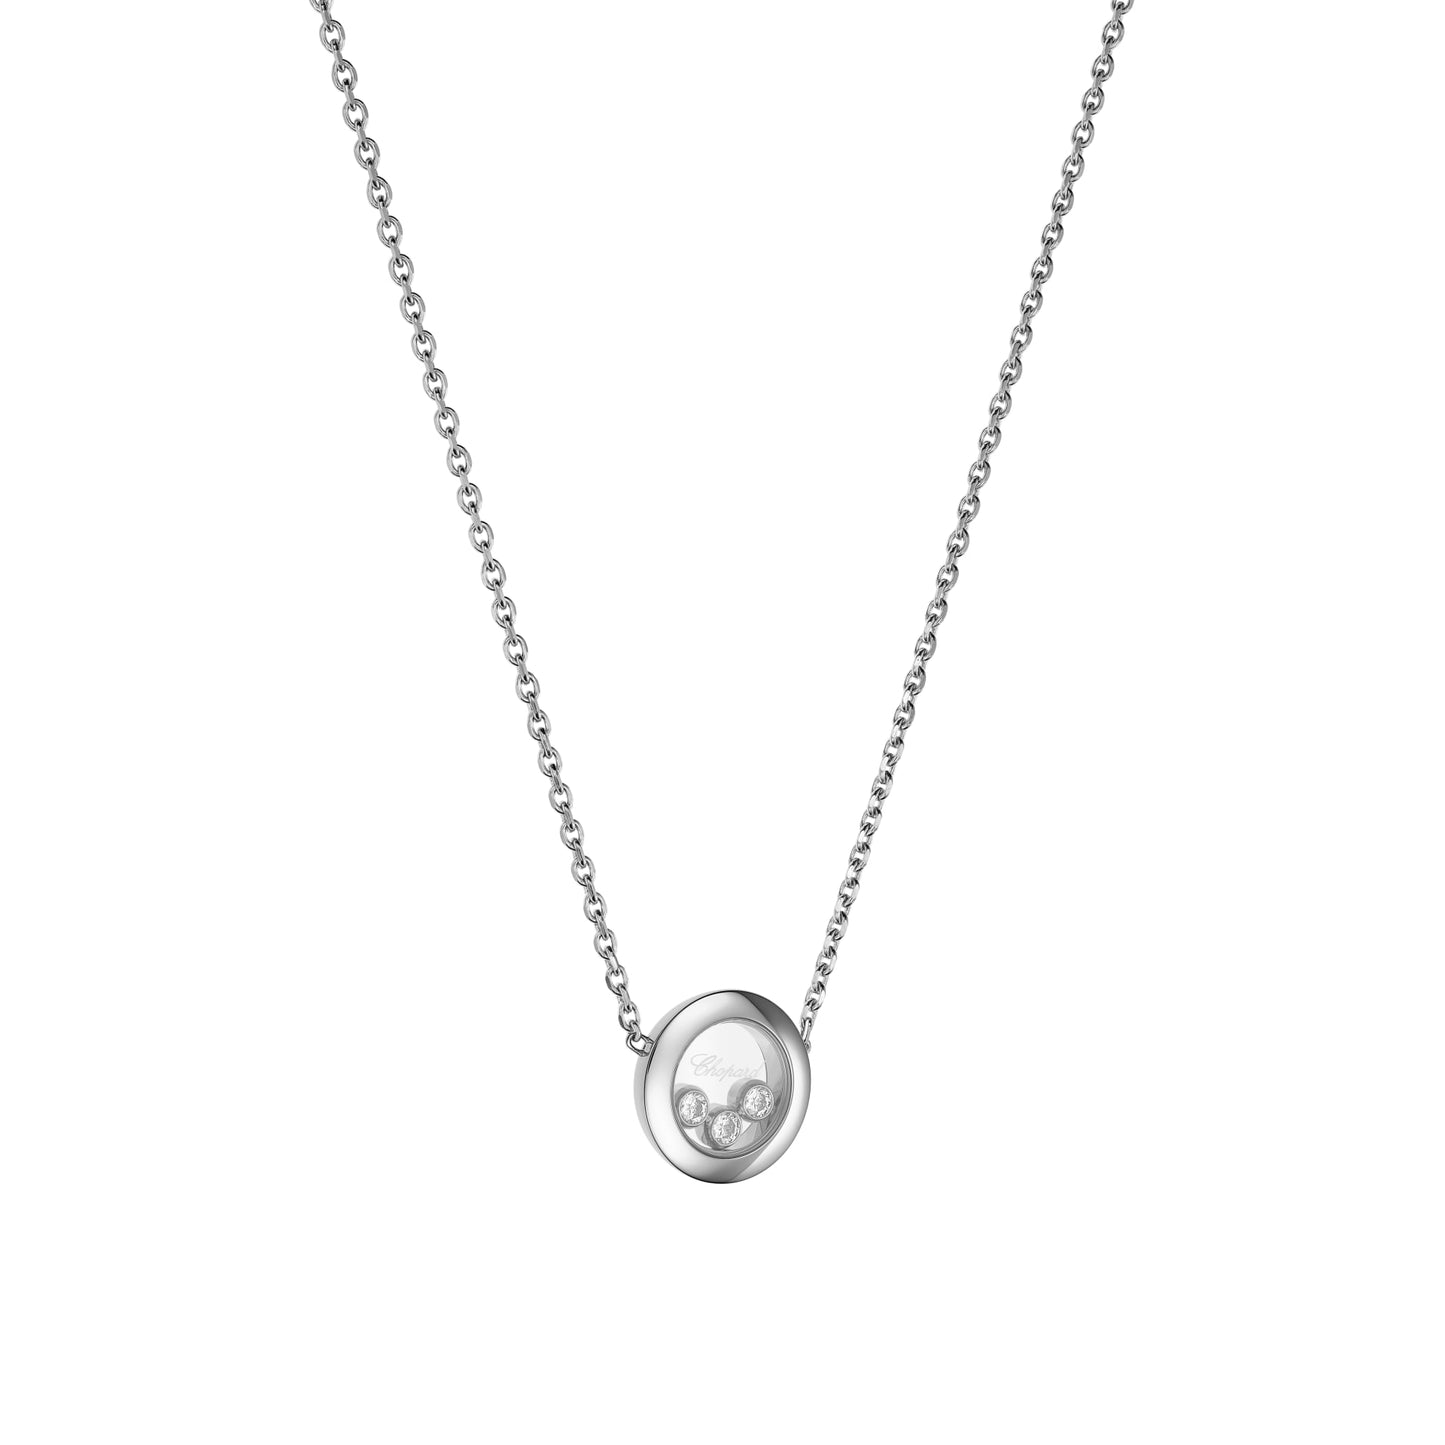 HAPPY DIAMONDS ICONS NECKLACE, ETHICAL WHITE GOLD, DIAMONDS 81A018-1001